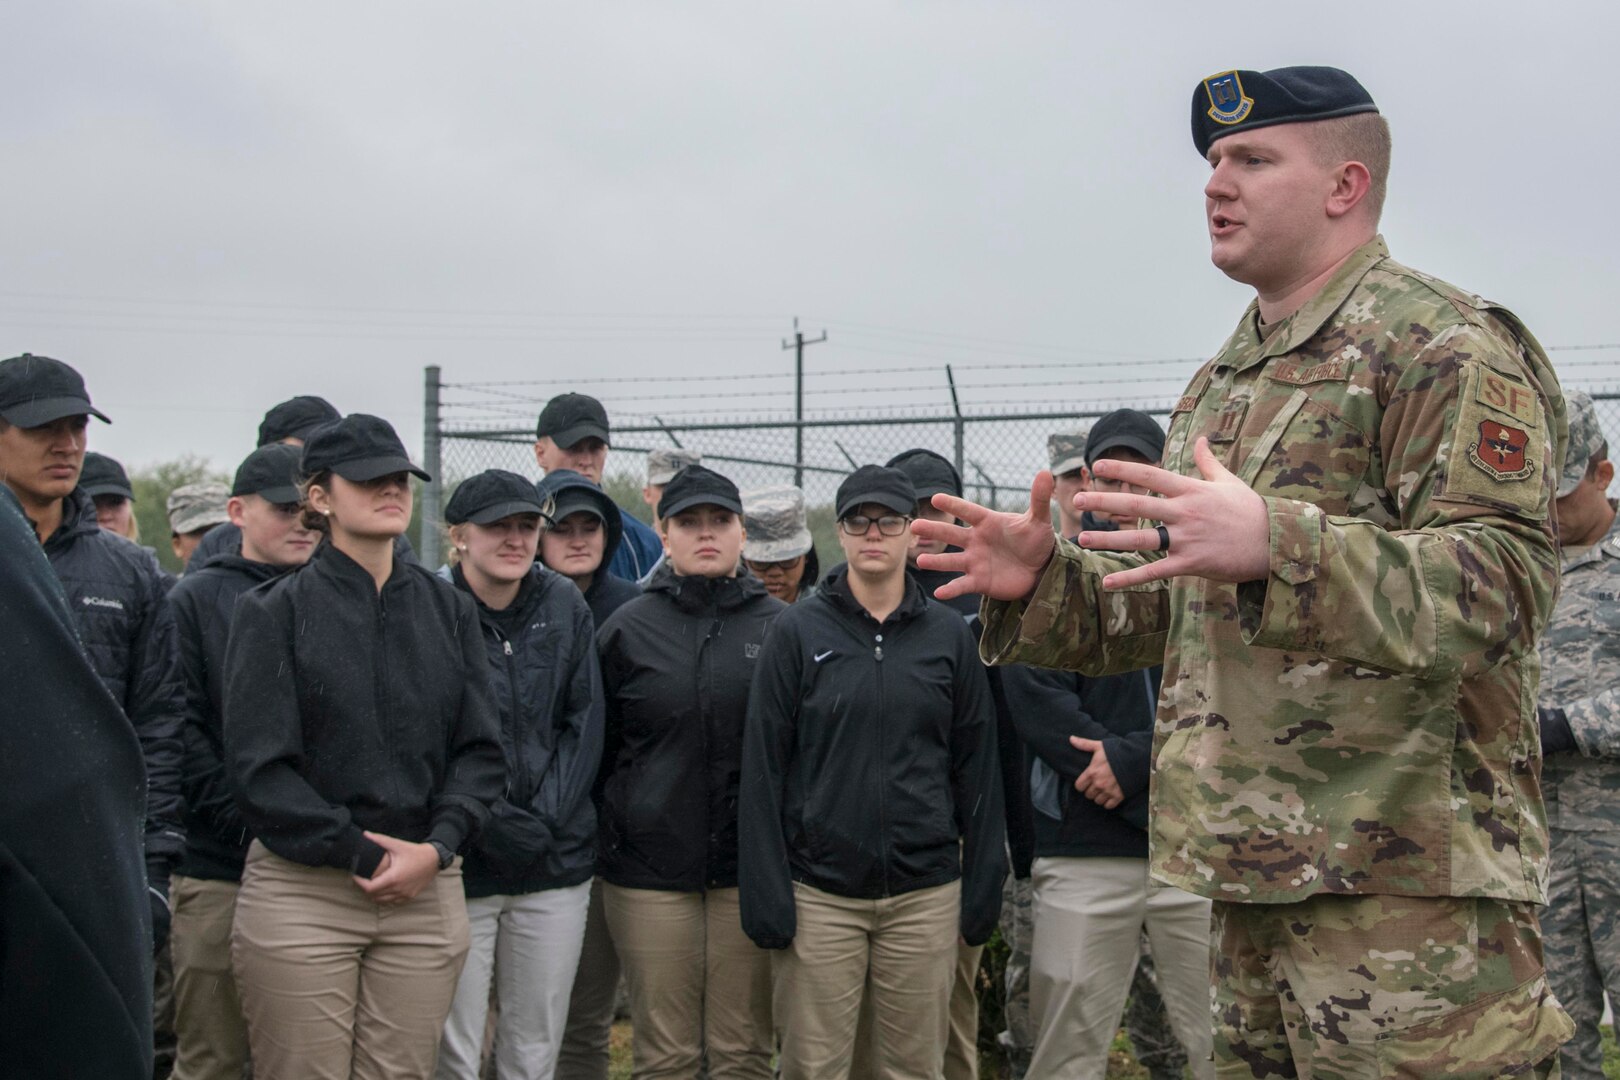 The cadets gained insight from officers in different career fields, attended a 902nd SFS military working dog demonstration, and toured the 558th and 560th Flying Training Squadrons